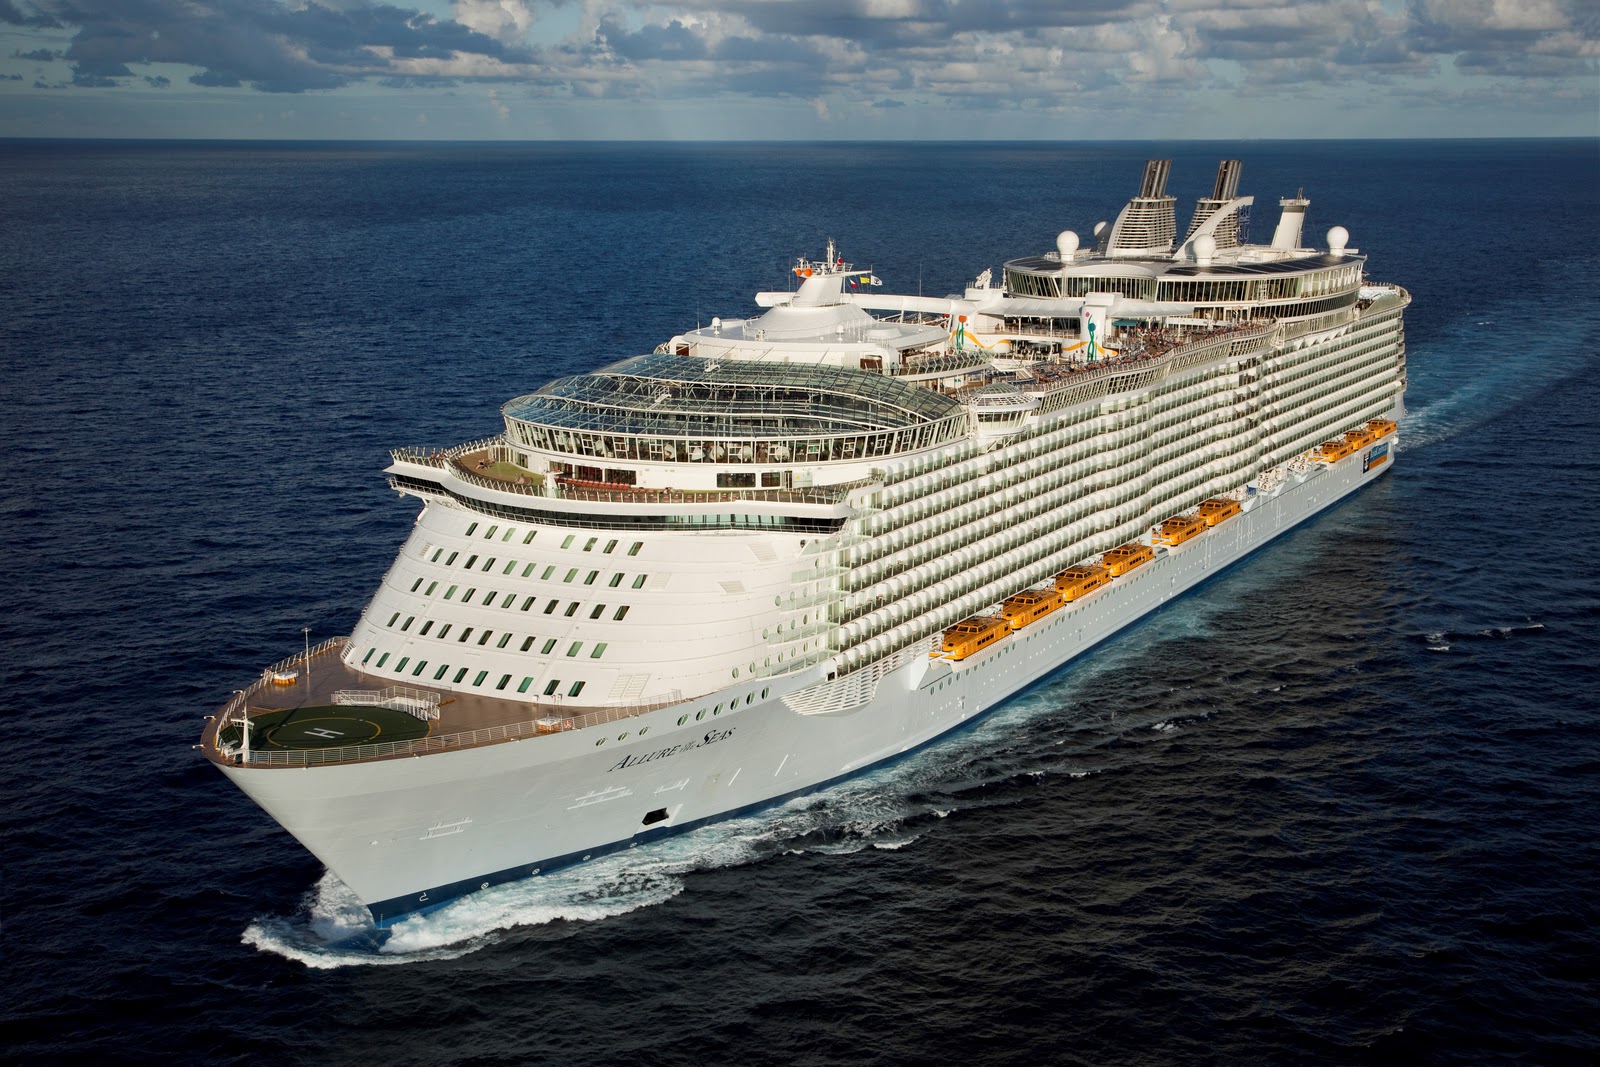 The Travel Authority: The Allure of the Seas. Royal Caribbean's newest addition to their fleet ...